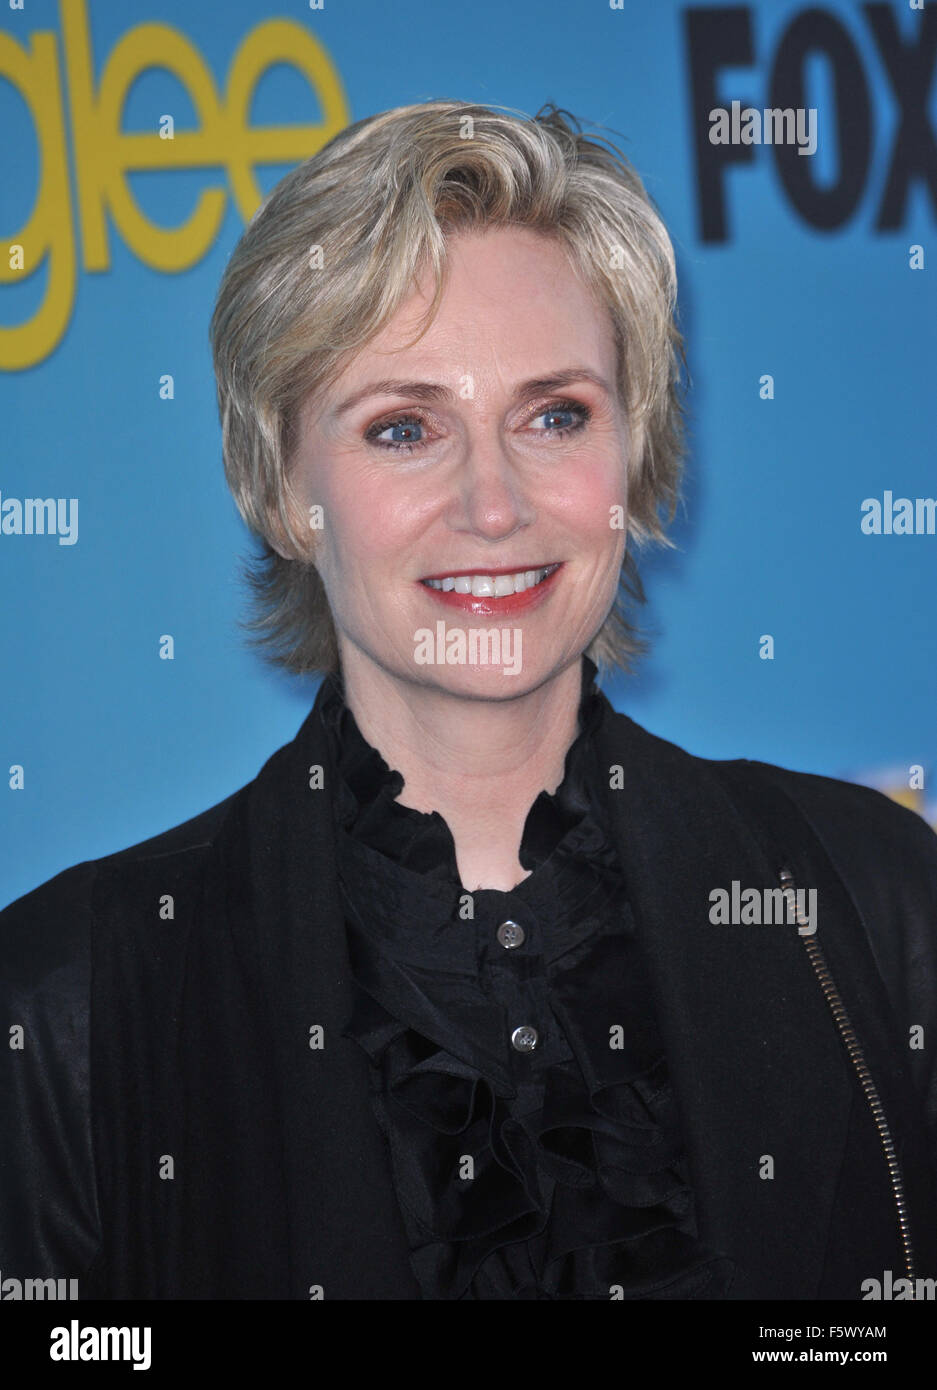 LOS ANGELES, CA - 12. April 2010: Jane Lynch an der Spring-Serie "Glee" premiere Party im Chateau Marmont, West Hollywood. Stockfoto